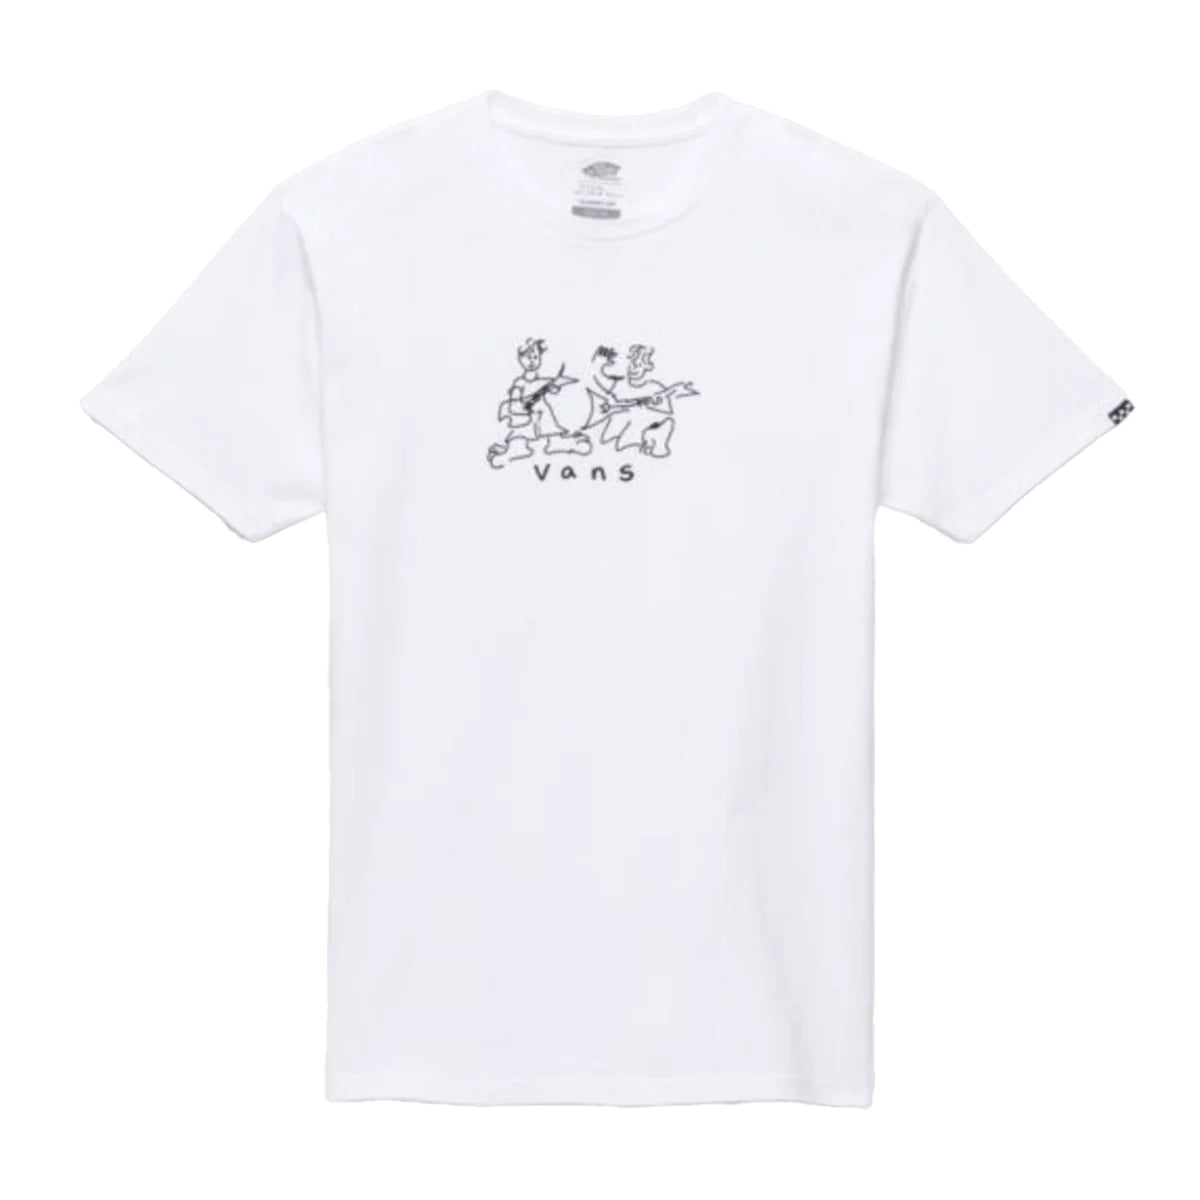 Nick Michel S/S Tee Shirt Wht(size options listed)